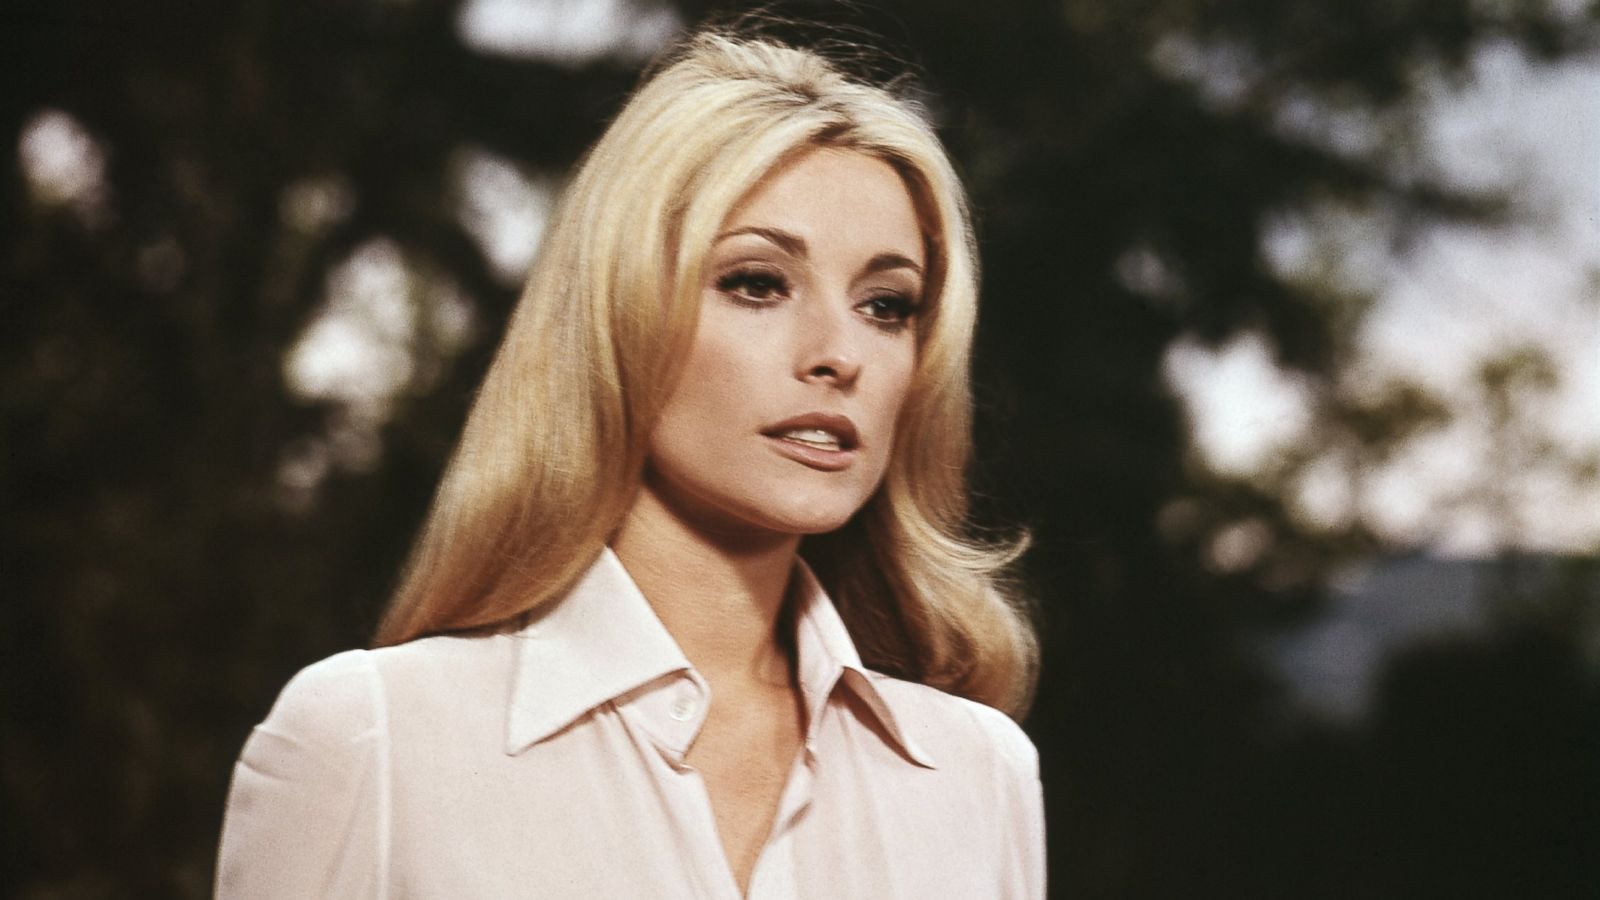 Mother was 'screaming': Relatives of Sharon Tate, Jay Sebring recall learning of Manson family murders